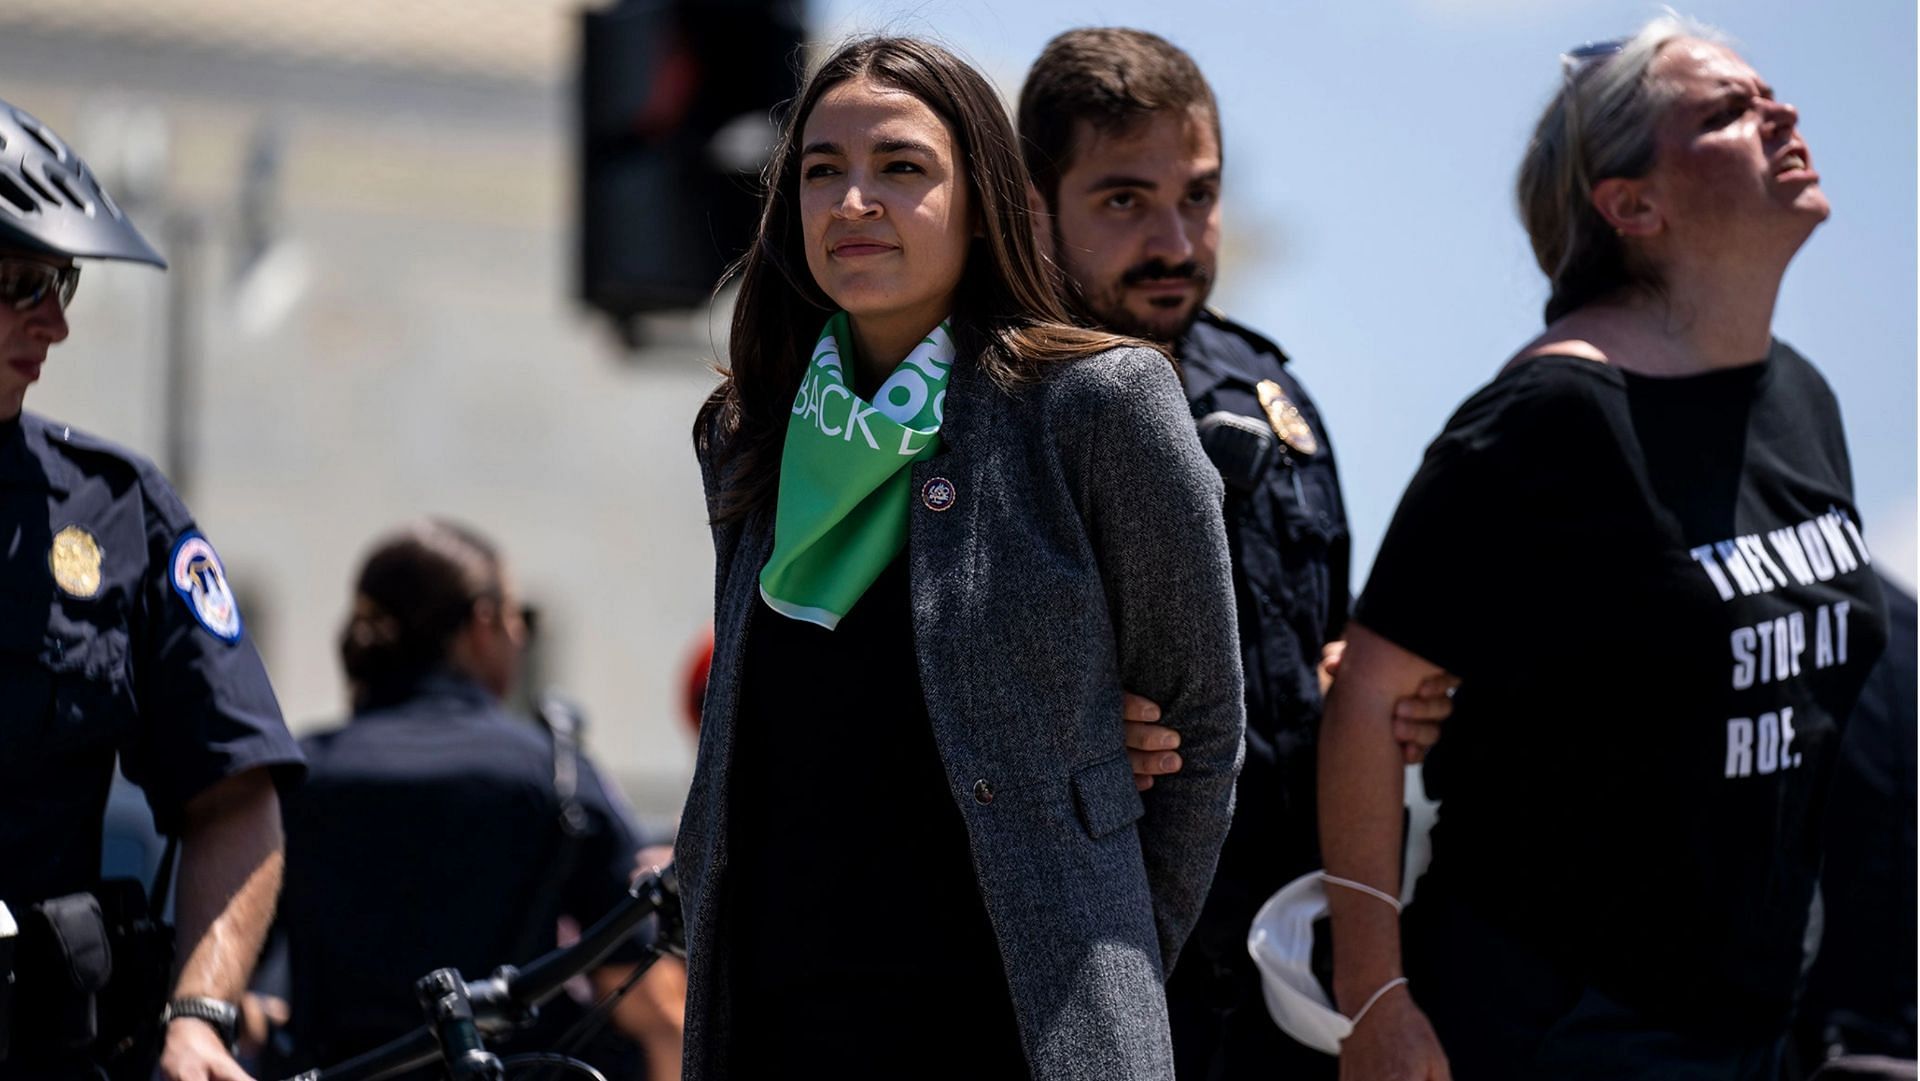 AOC was slammed online for pretending to be arrested at the US Capitol on July 19. (Image via Kent Nishimura/Getty)